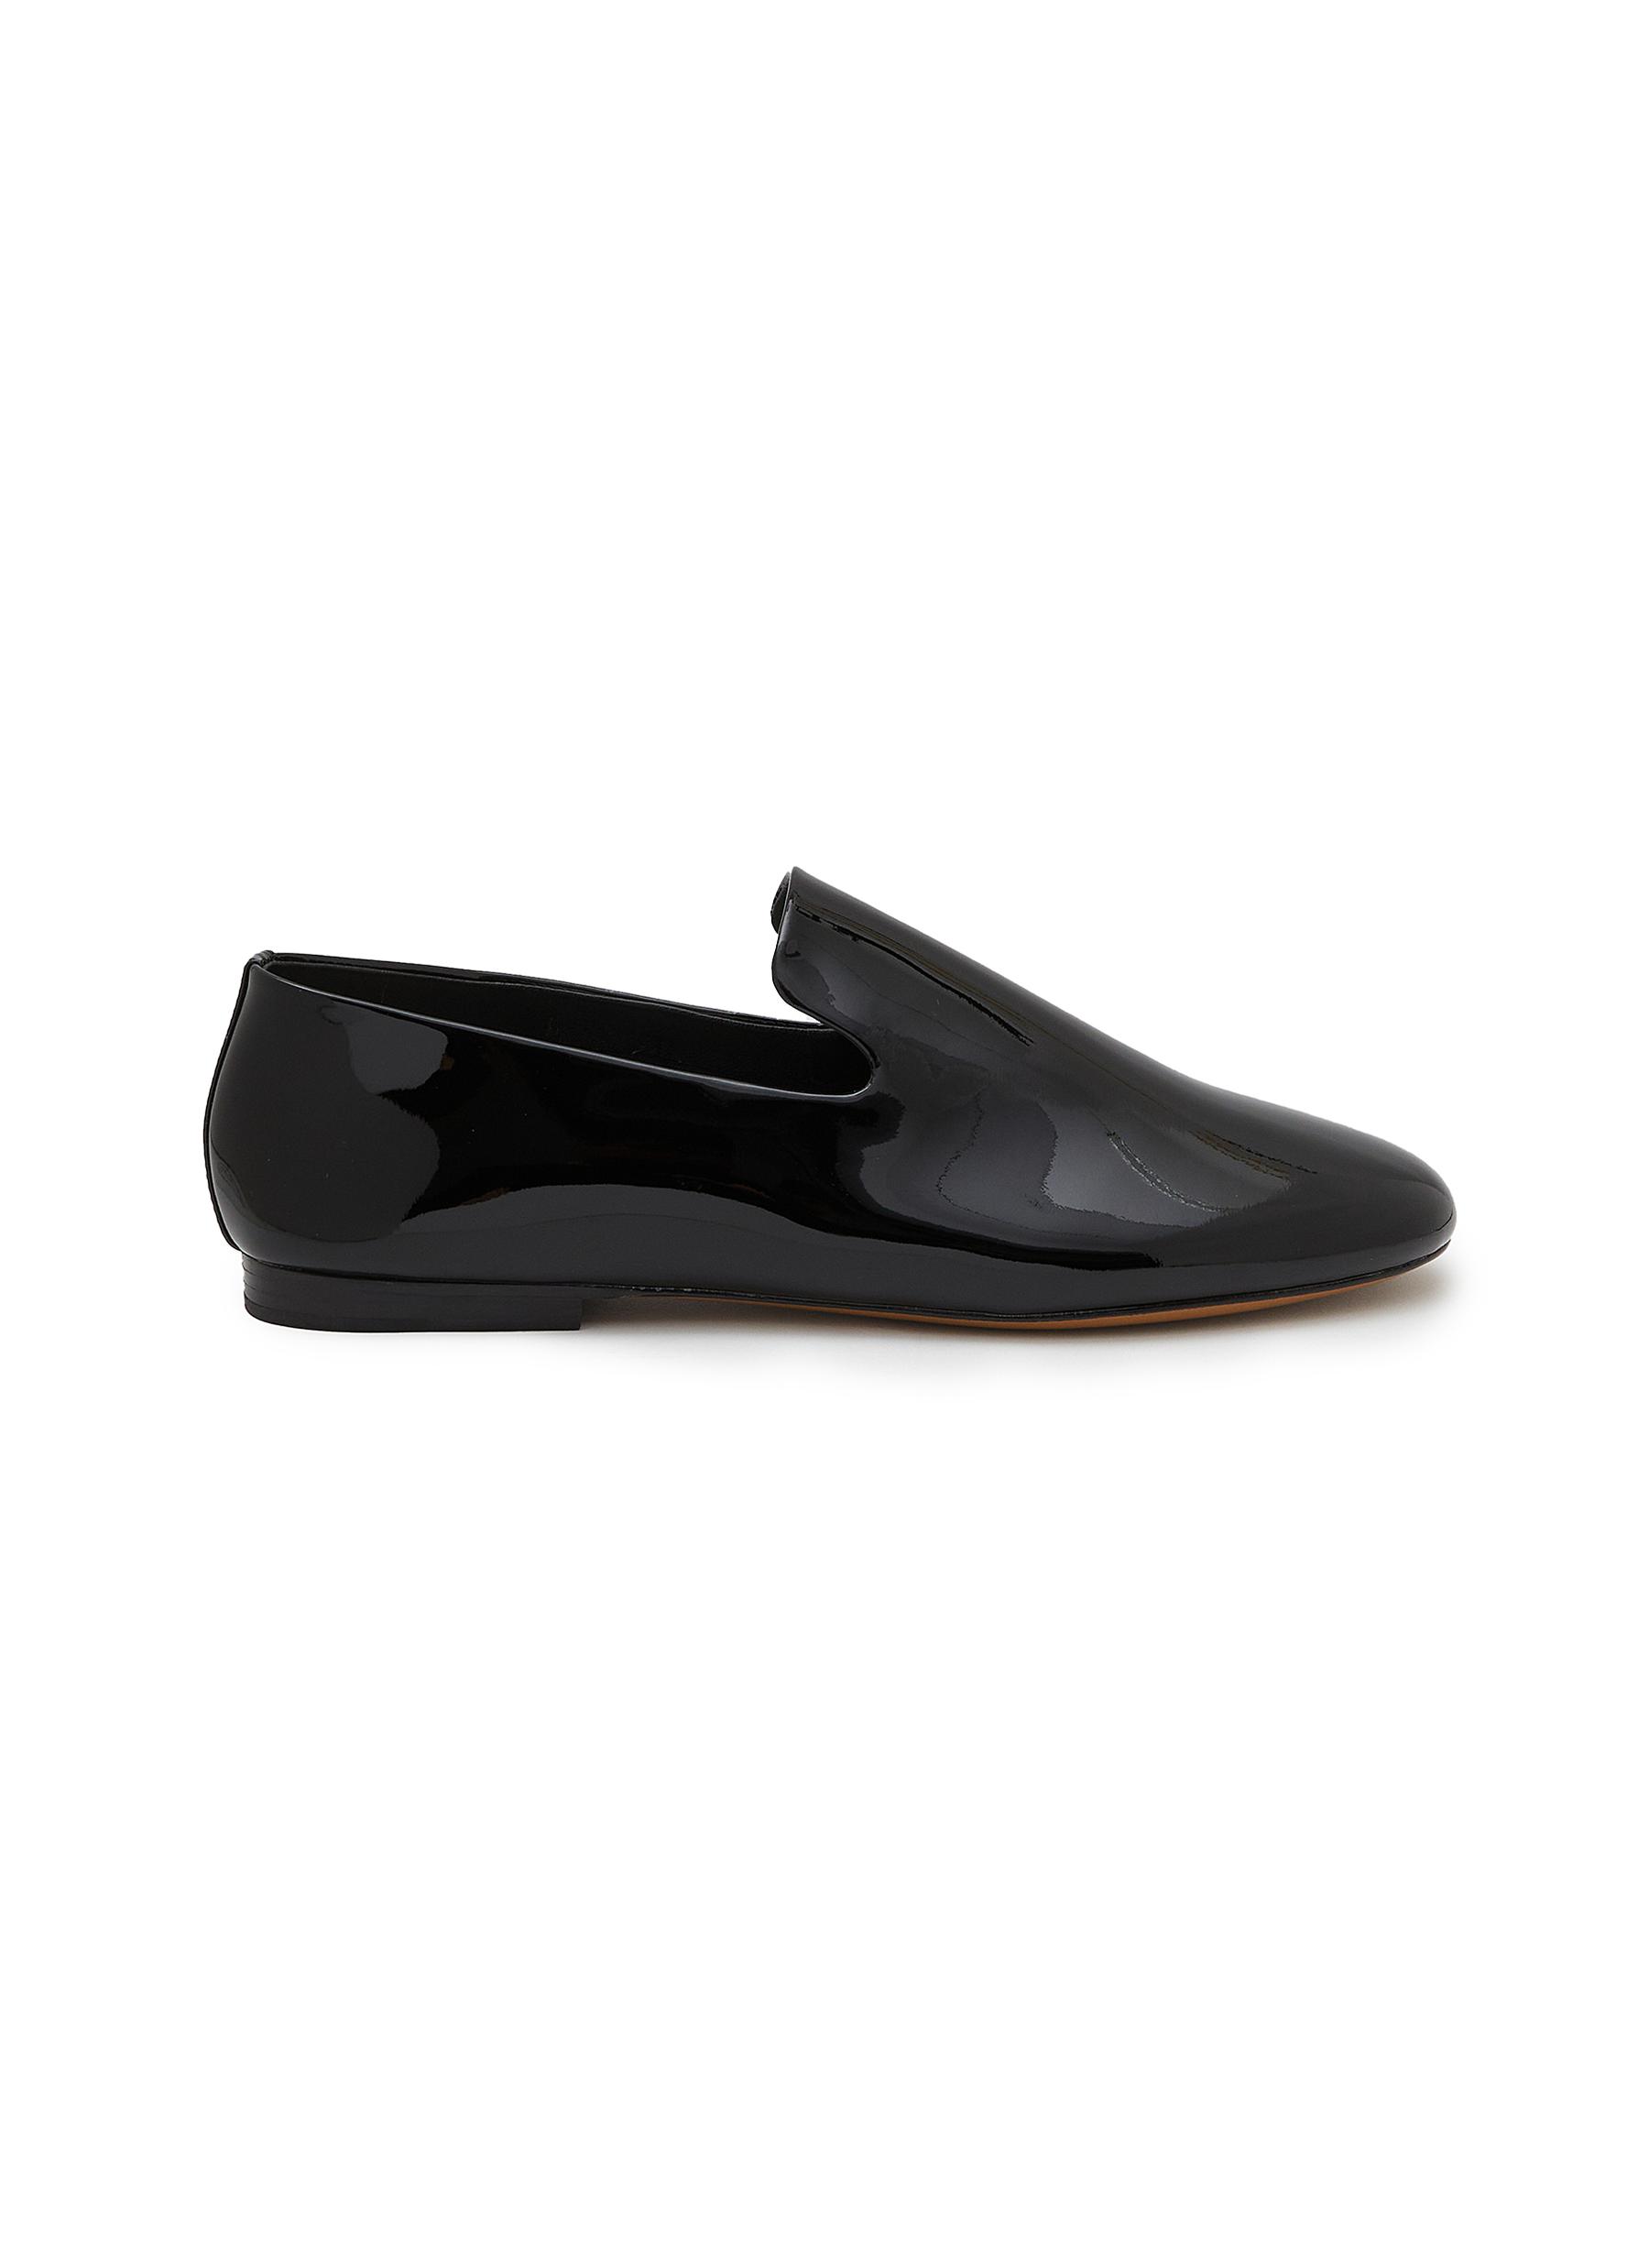 Verona Patent Leather Loafers